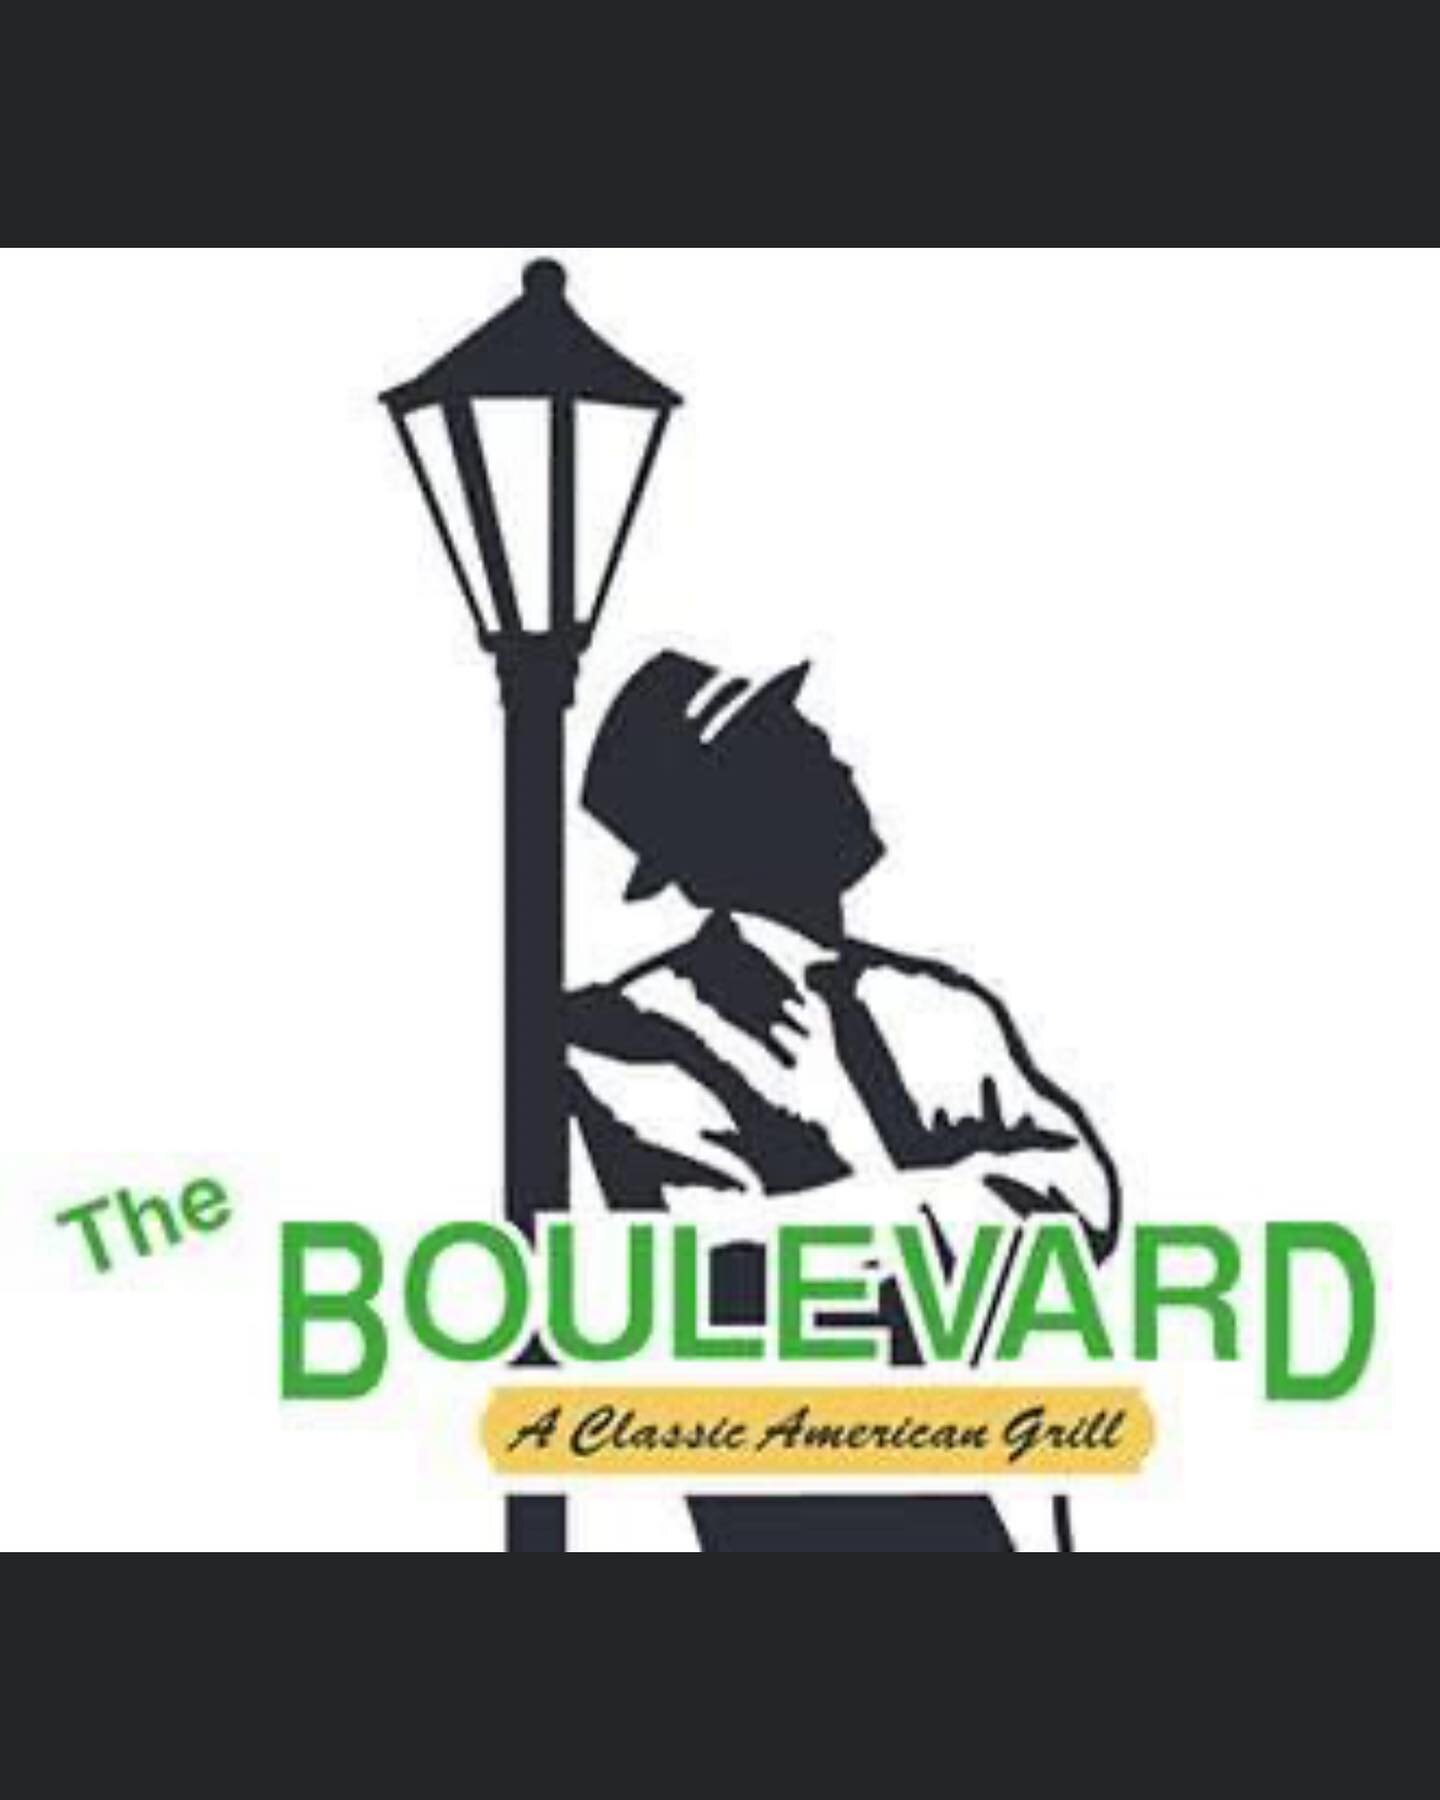 We want to thank the owners of The Boulevard (Greensburg, PA) for returning as a silver sponsor this year. We can't thank you enough for your generosity over the years. 

They support us in honor of Melanie Grimm. One of our single most powerful pict